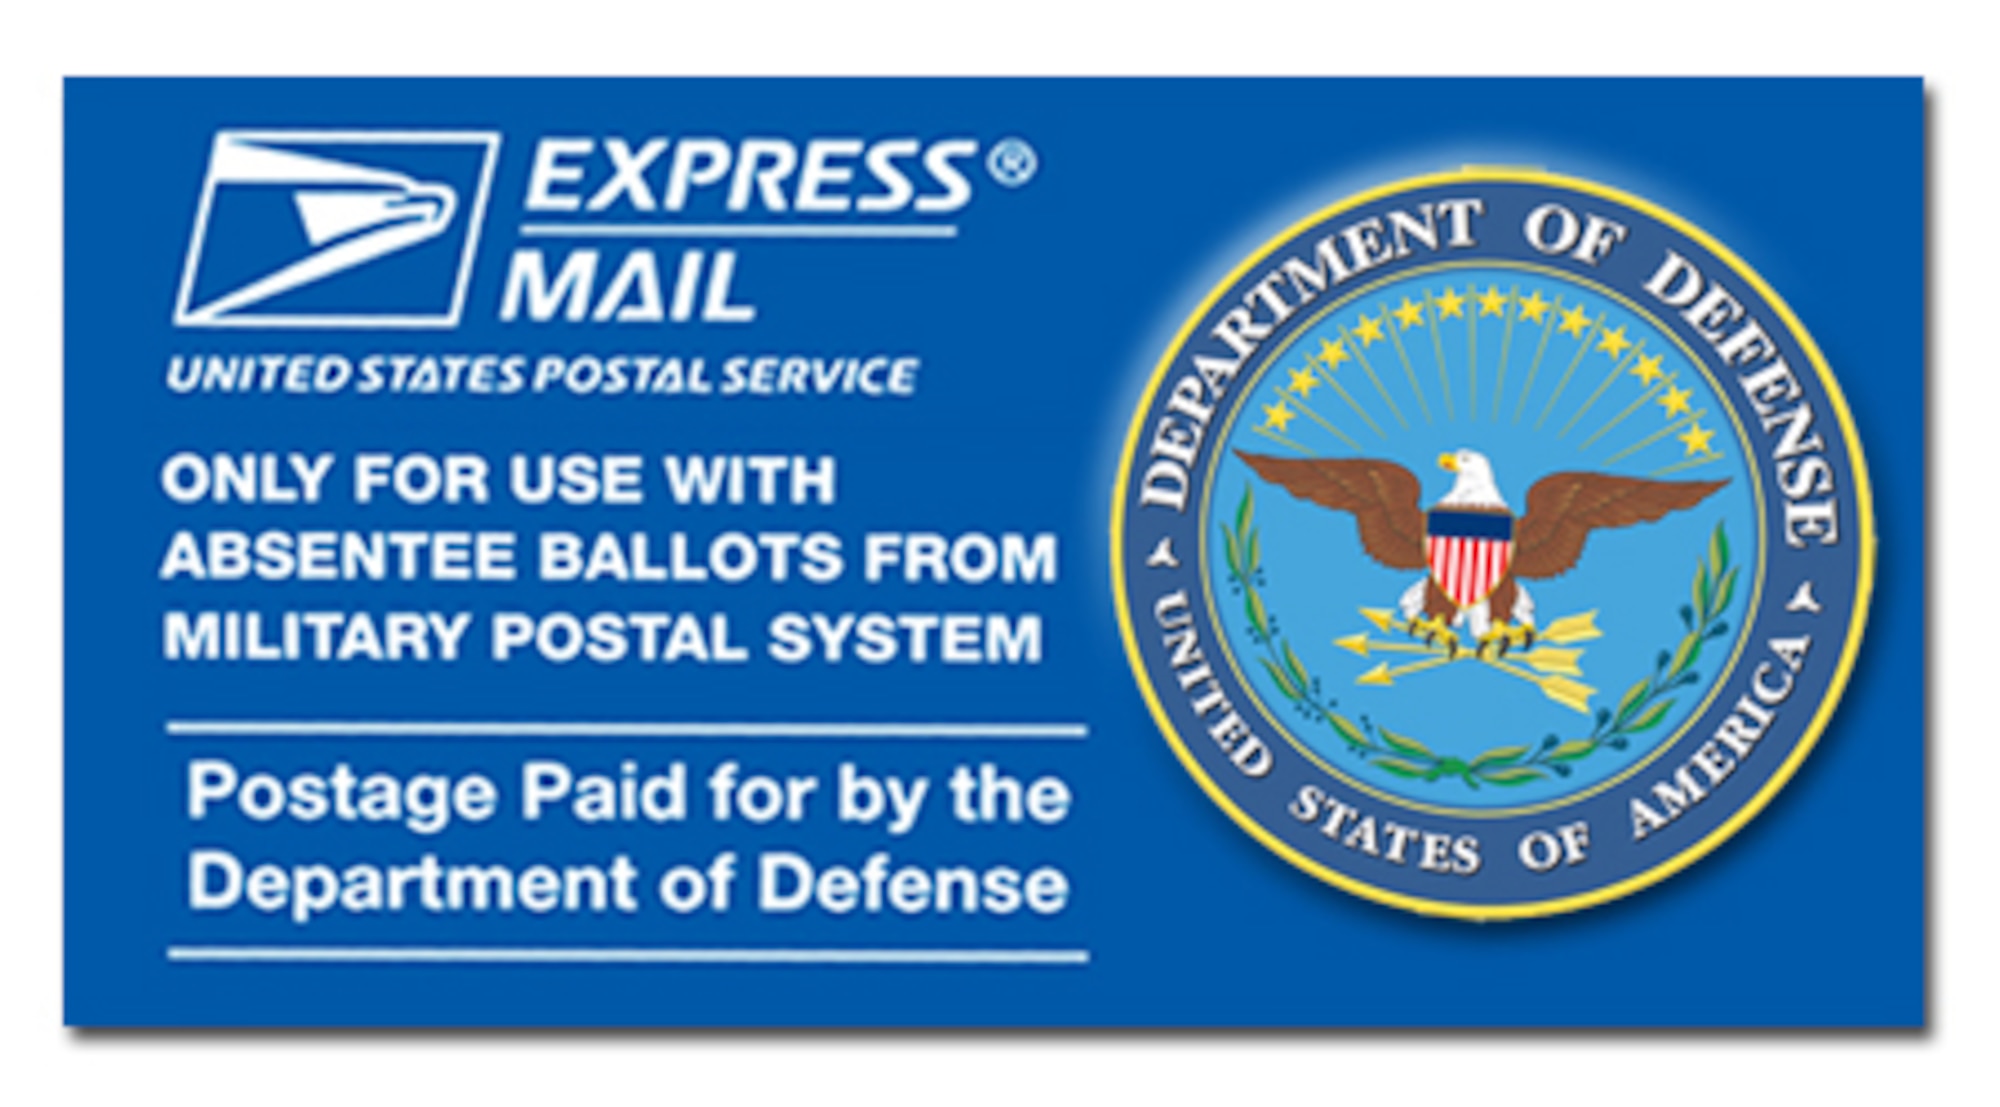 American citizens stationed or living overseas can use U.S. Postal Service express mail for free to send their official absentee voting ballots back to the United States. (U.S. Air Force graphic/Master Sgt. John Peters)